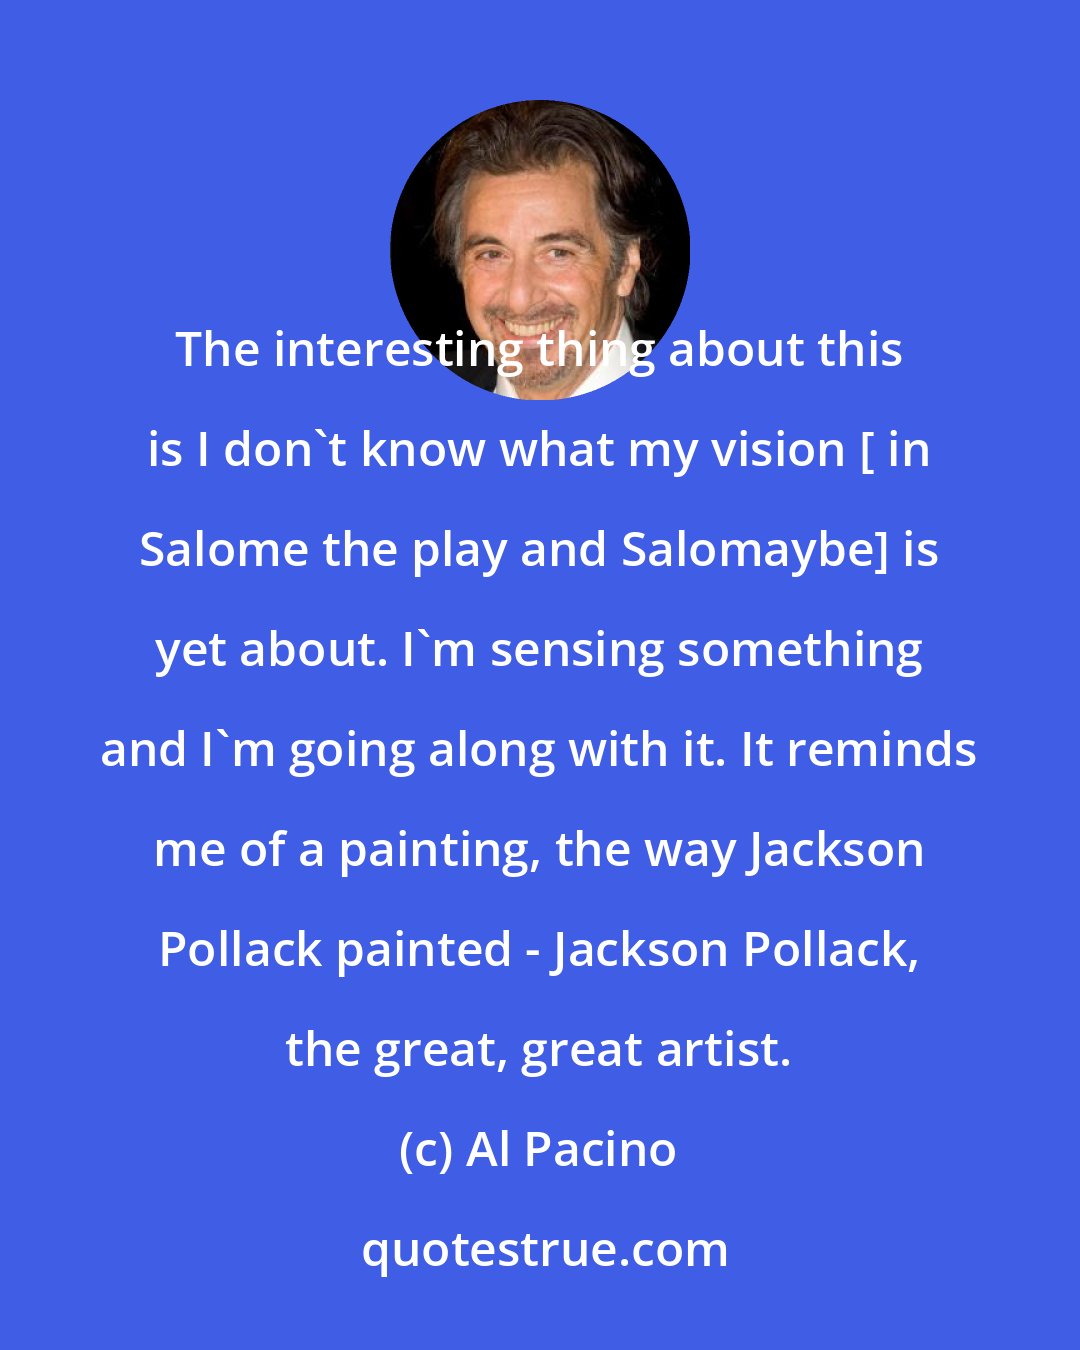 Al Pacino: The interesting thing about this is I don't know what my vision [ in Salome the play and Salomaybe] is yet about. I'm sensing something and I'm going along with it. It reminds me of a painting, the way Jackson Pollack painted - Jackson Pollack, the great, great artist.